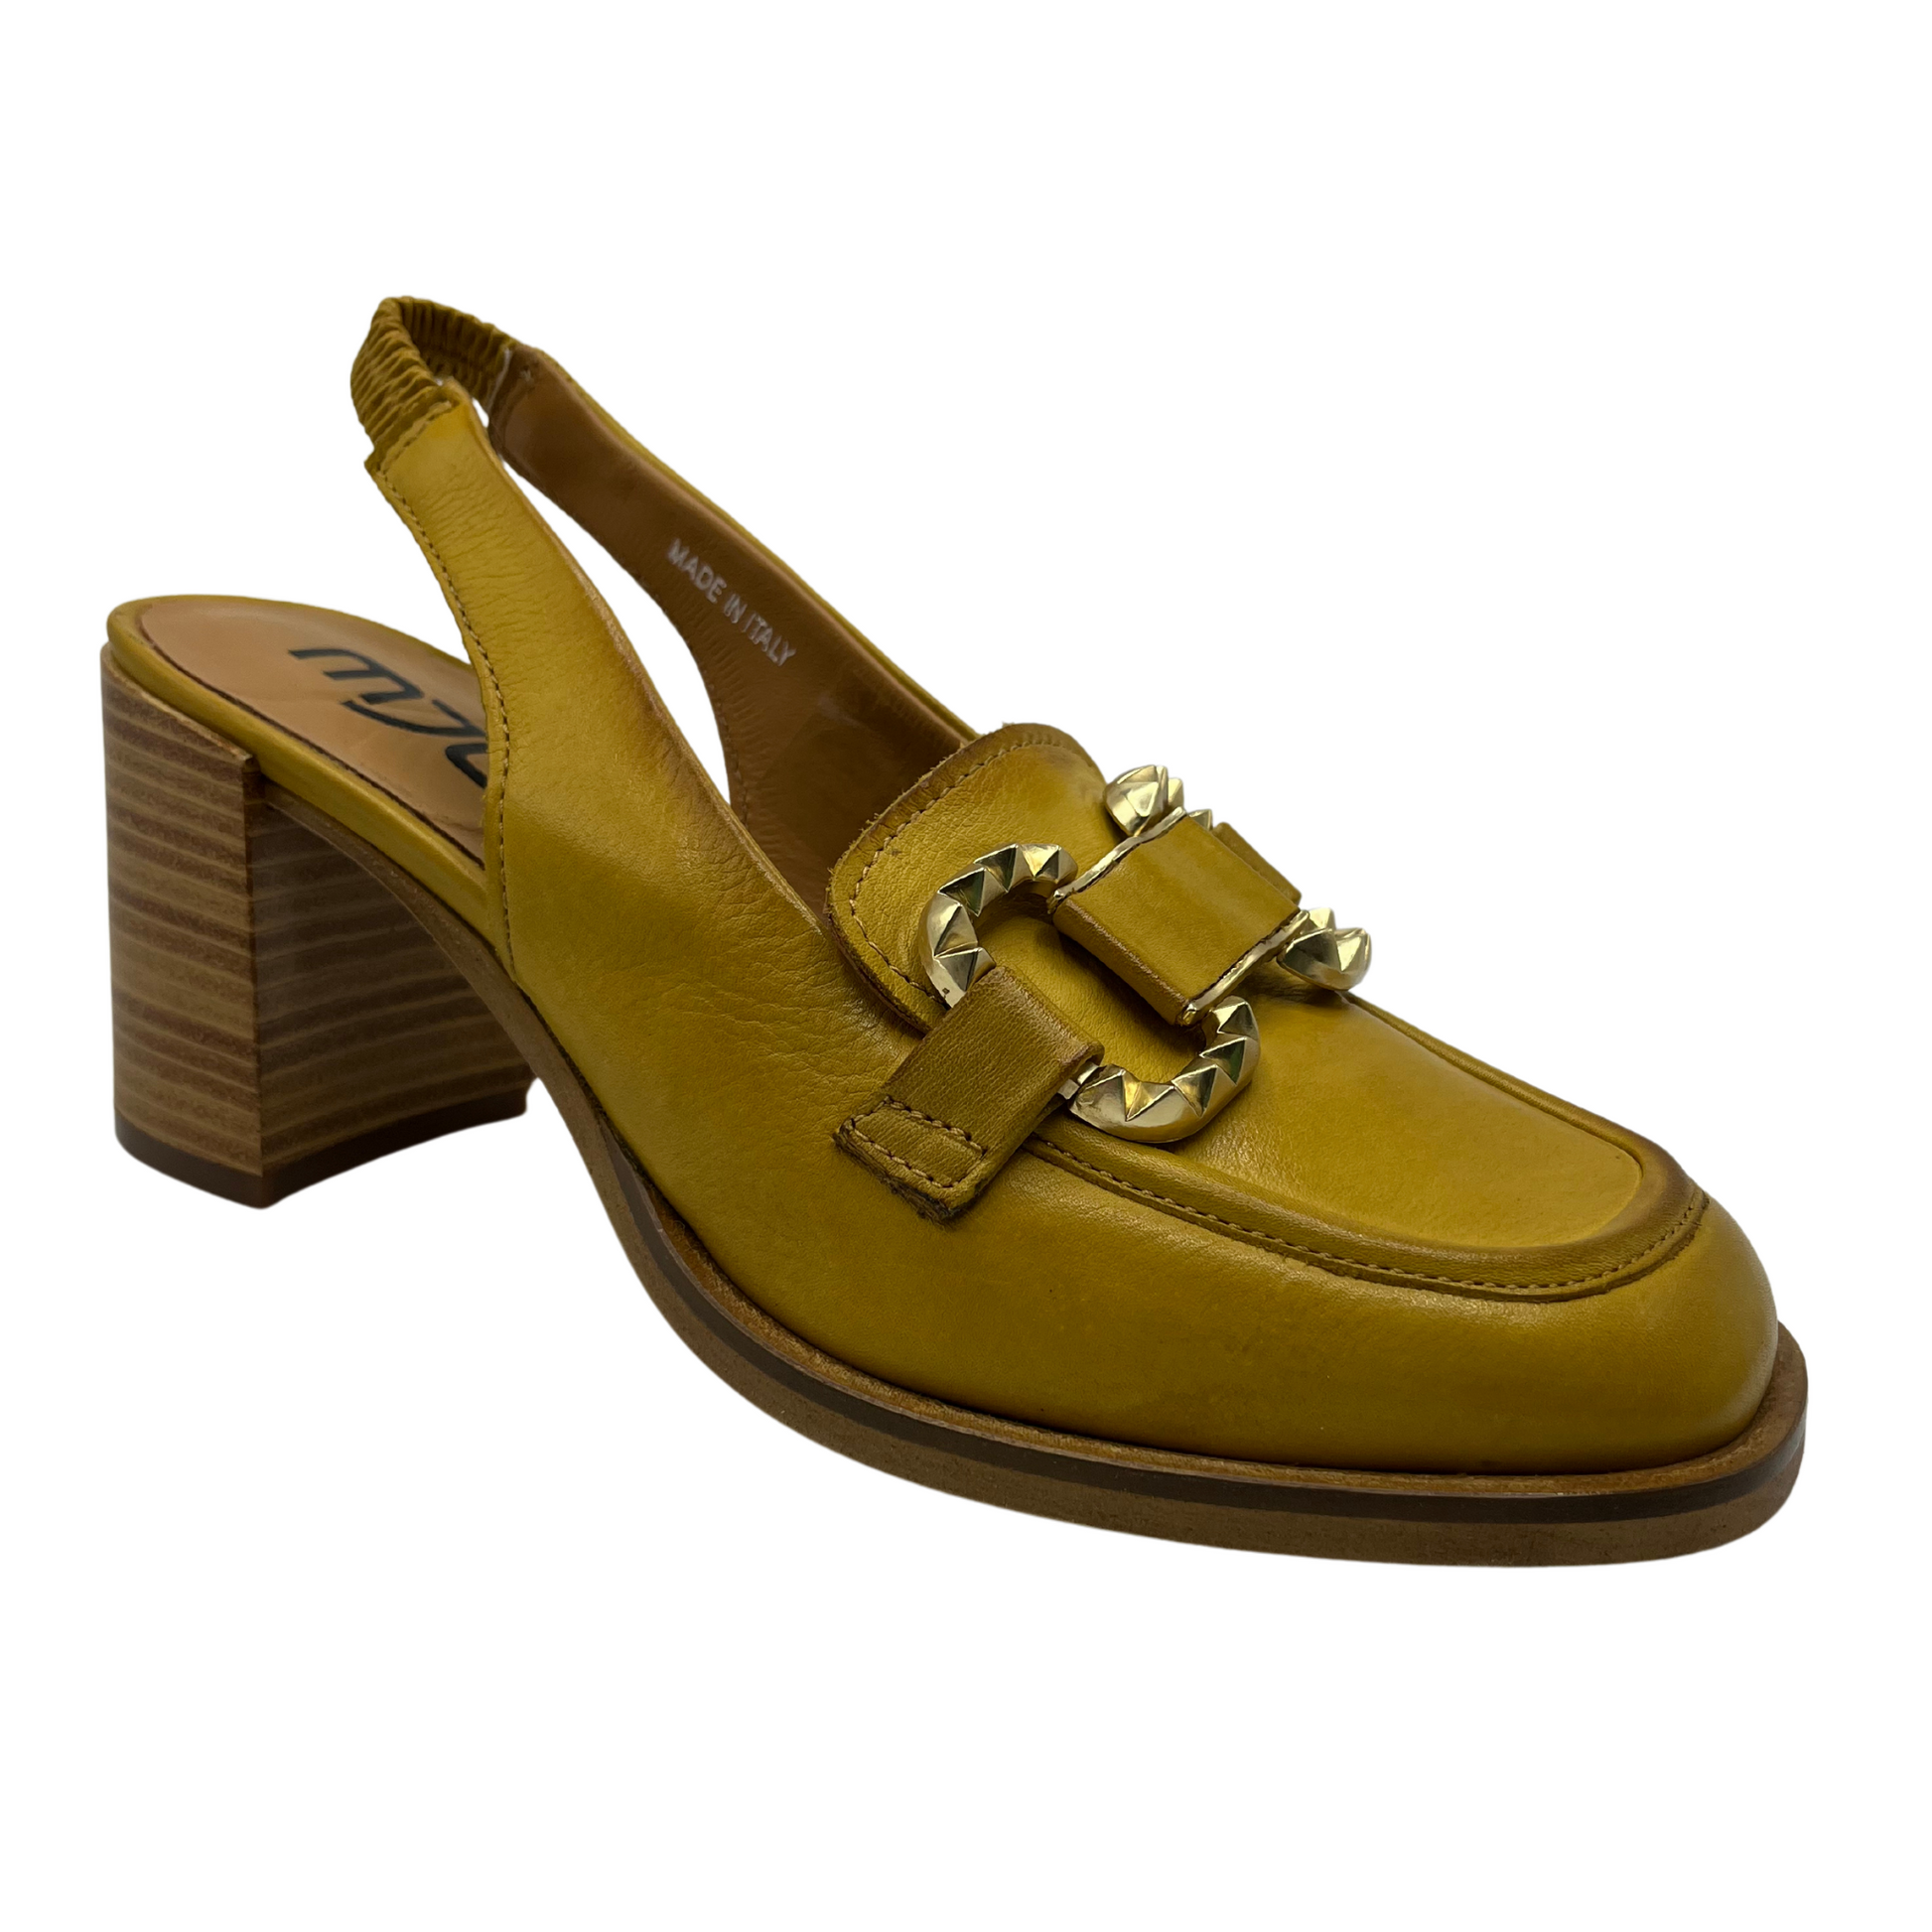 45 degree angled view of mustard yellow loafer with block heel and gold detail on toe box. Sling back strap